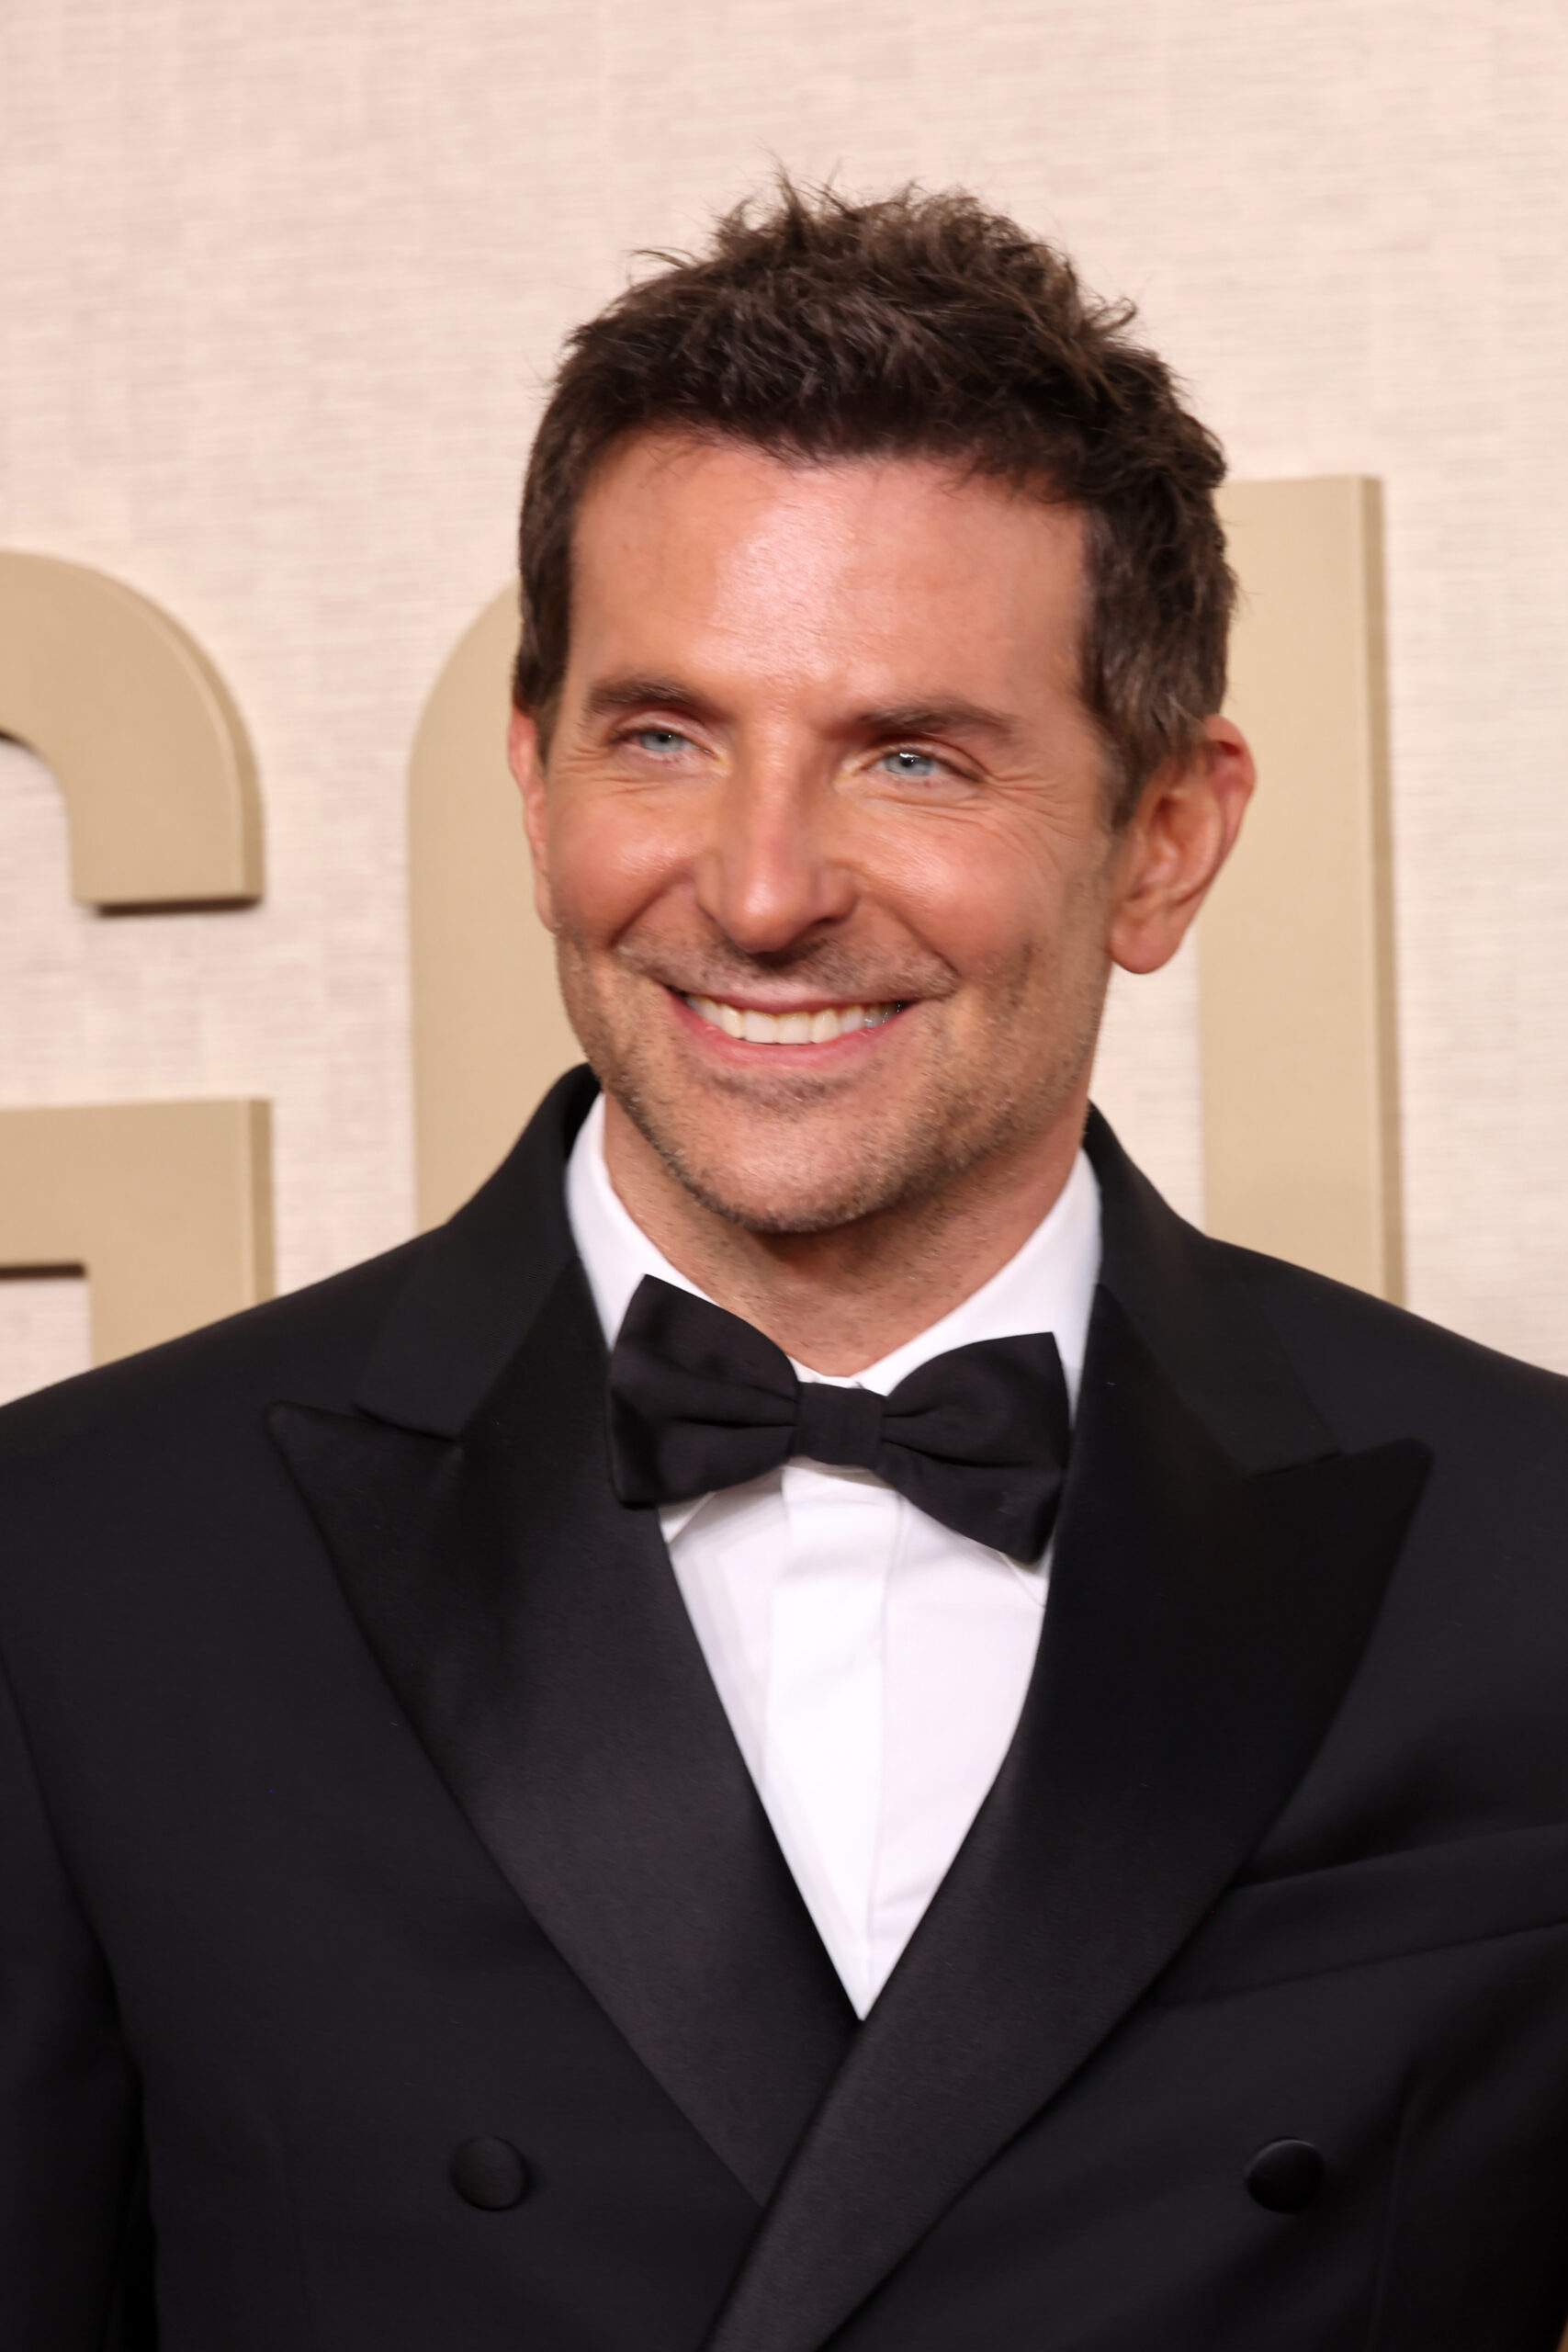 BEVERLY HILLS, CALIFORNIA - JANUARY 07: Bradley Cooper attends the 81st Annual Golden Globe Awards at The Beverly Hilton on January 07, 2024 in Beverly Hills, California. (Photo by Amy Sussman/Getty Images)